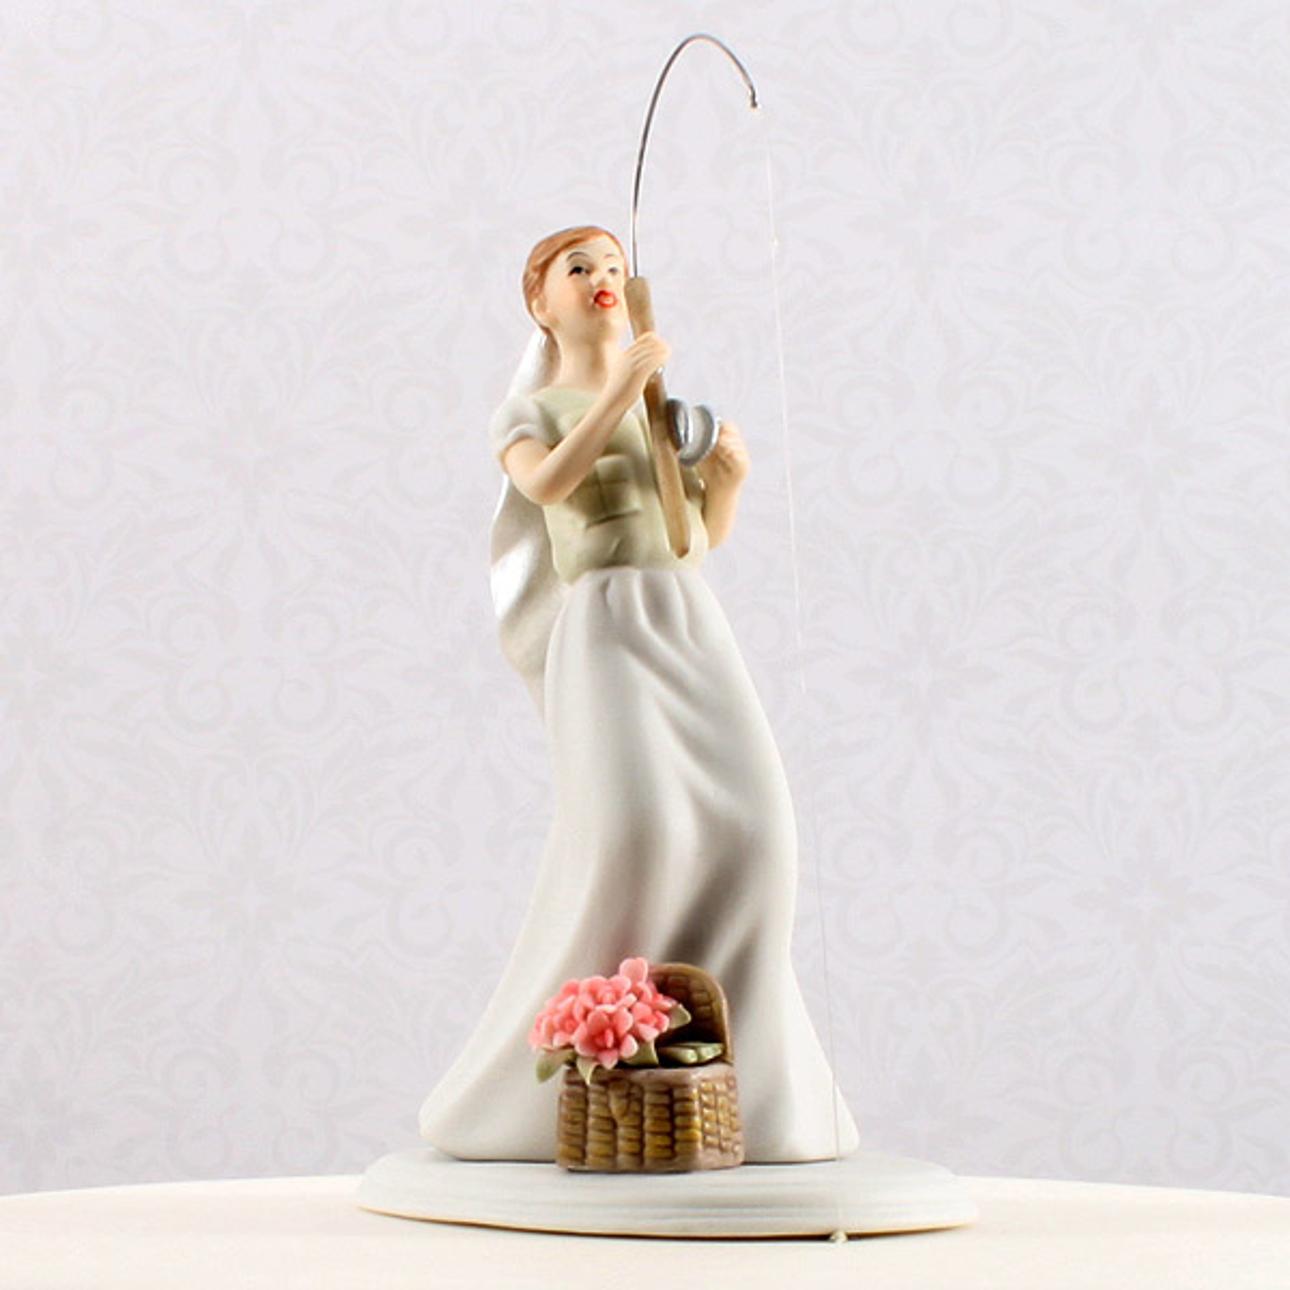 Gone Fishing Cake Topper - Charming Chick